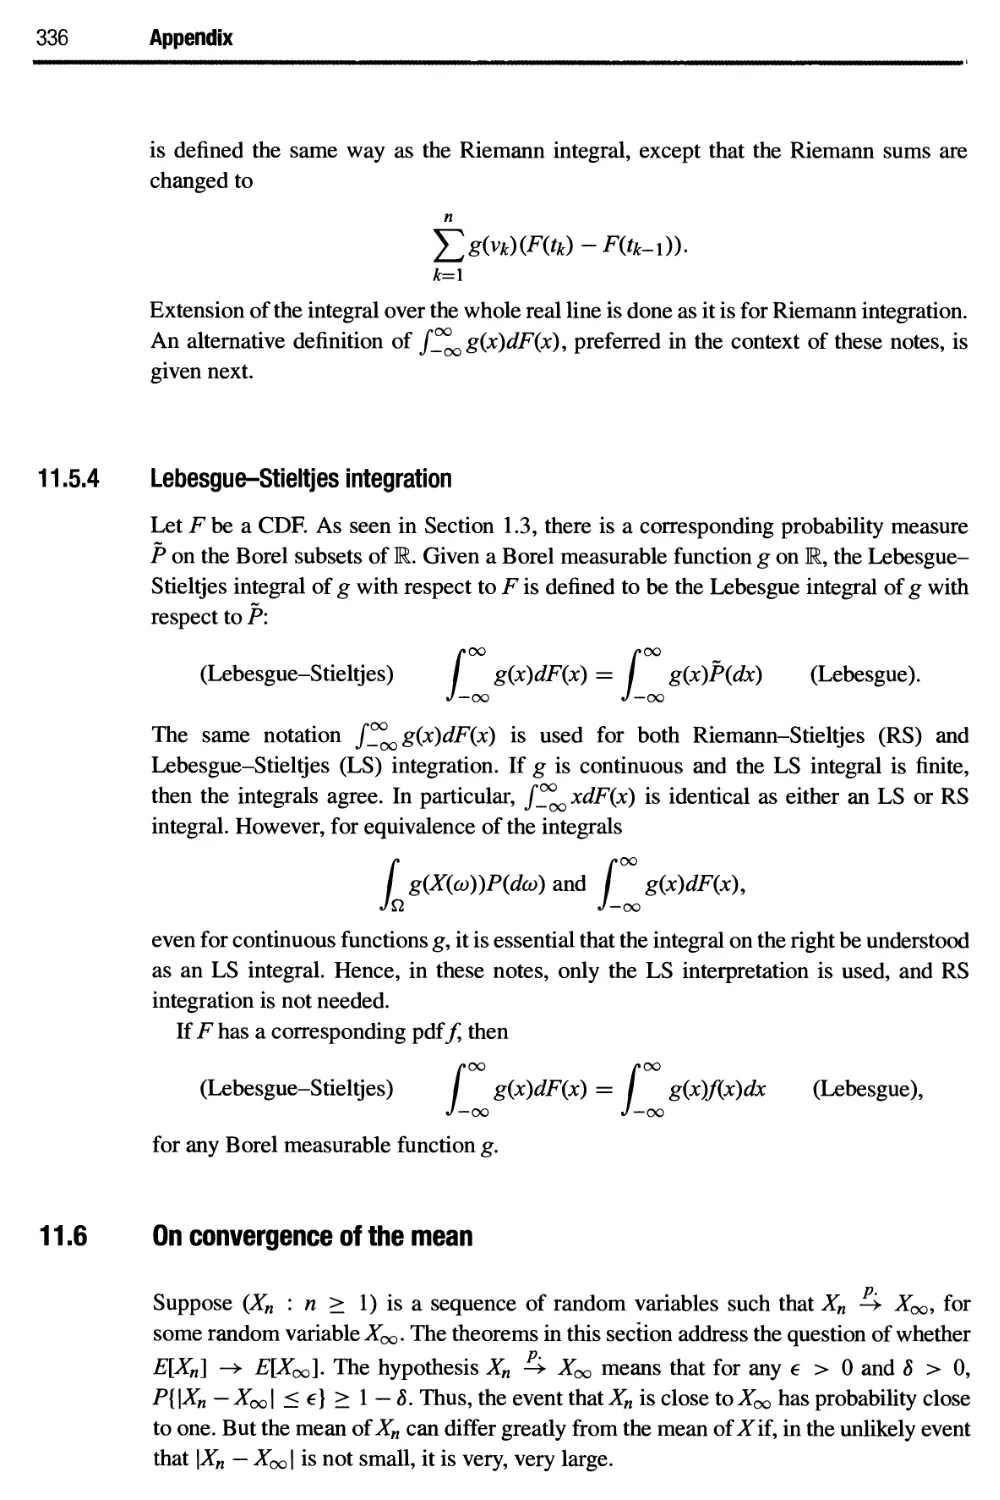 11.5.4 Lebesgue-Stieltjes integration 336
11.6 On convergence of the mean 336